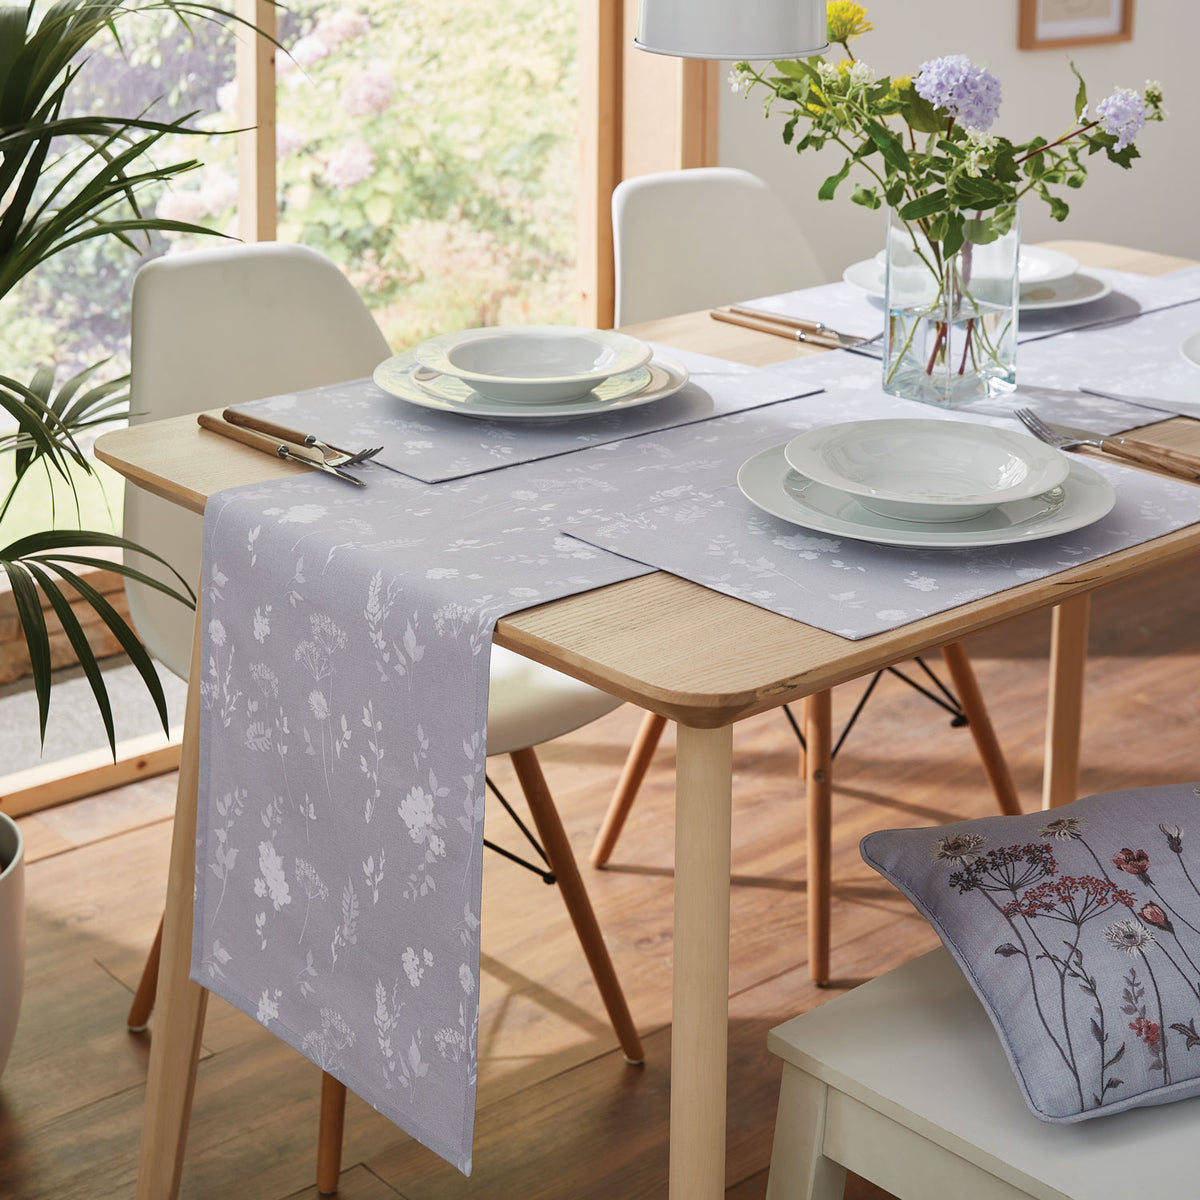 Dining Meadowsweet Floral Table Runner - White / Grey